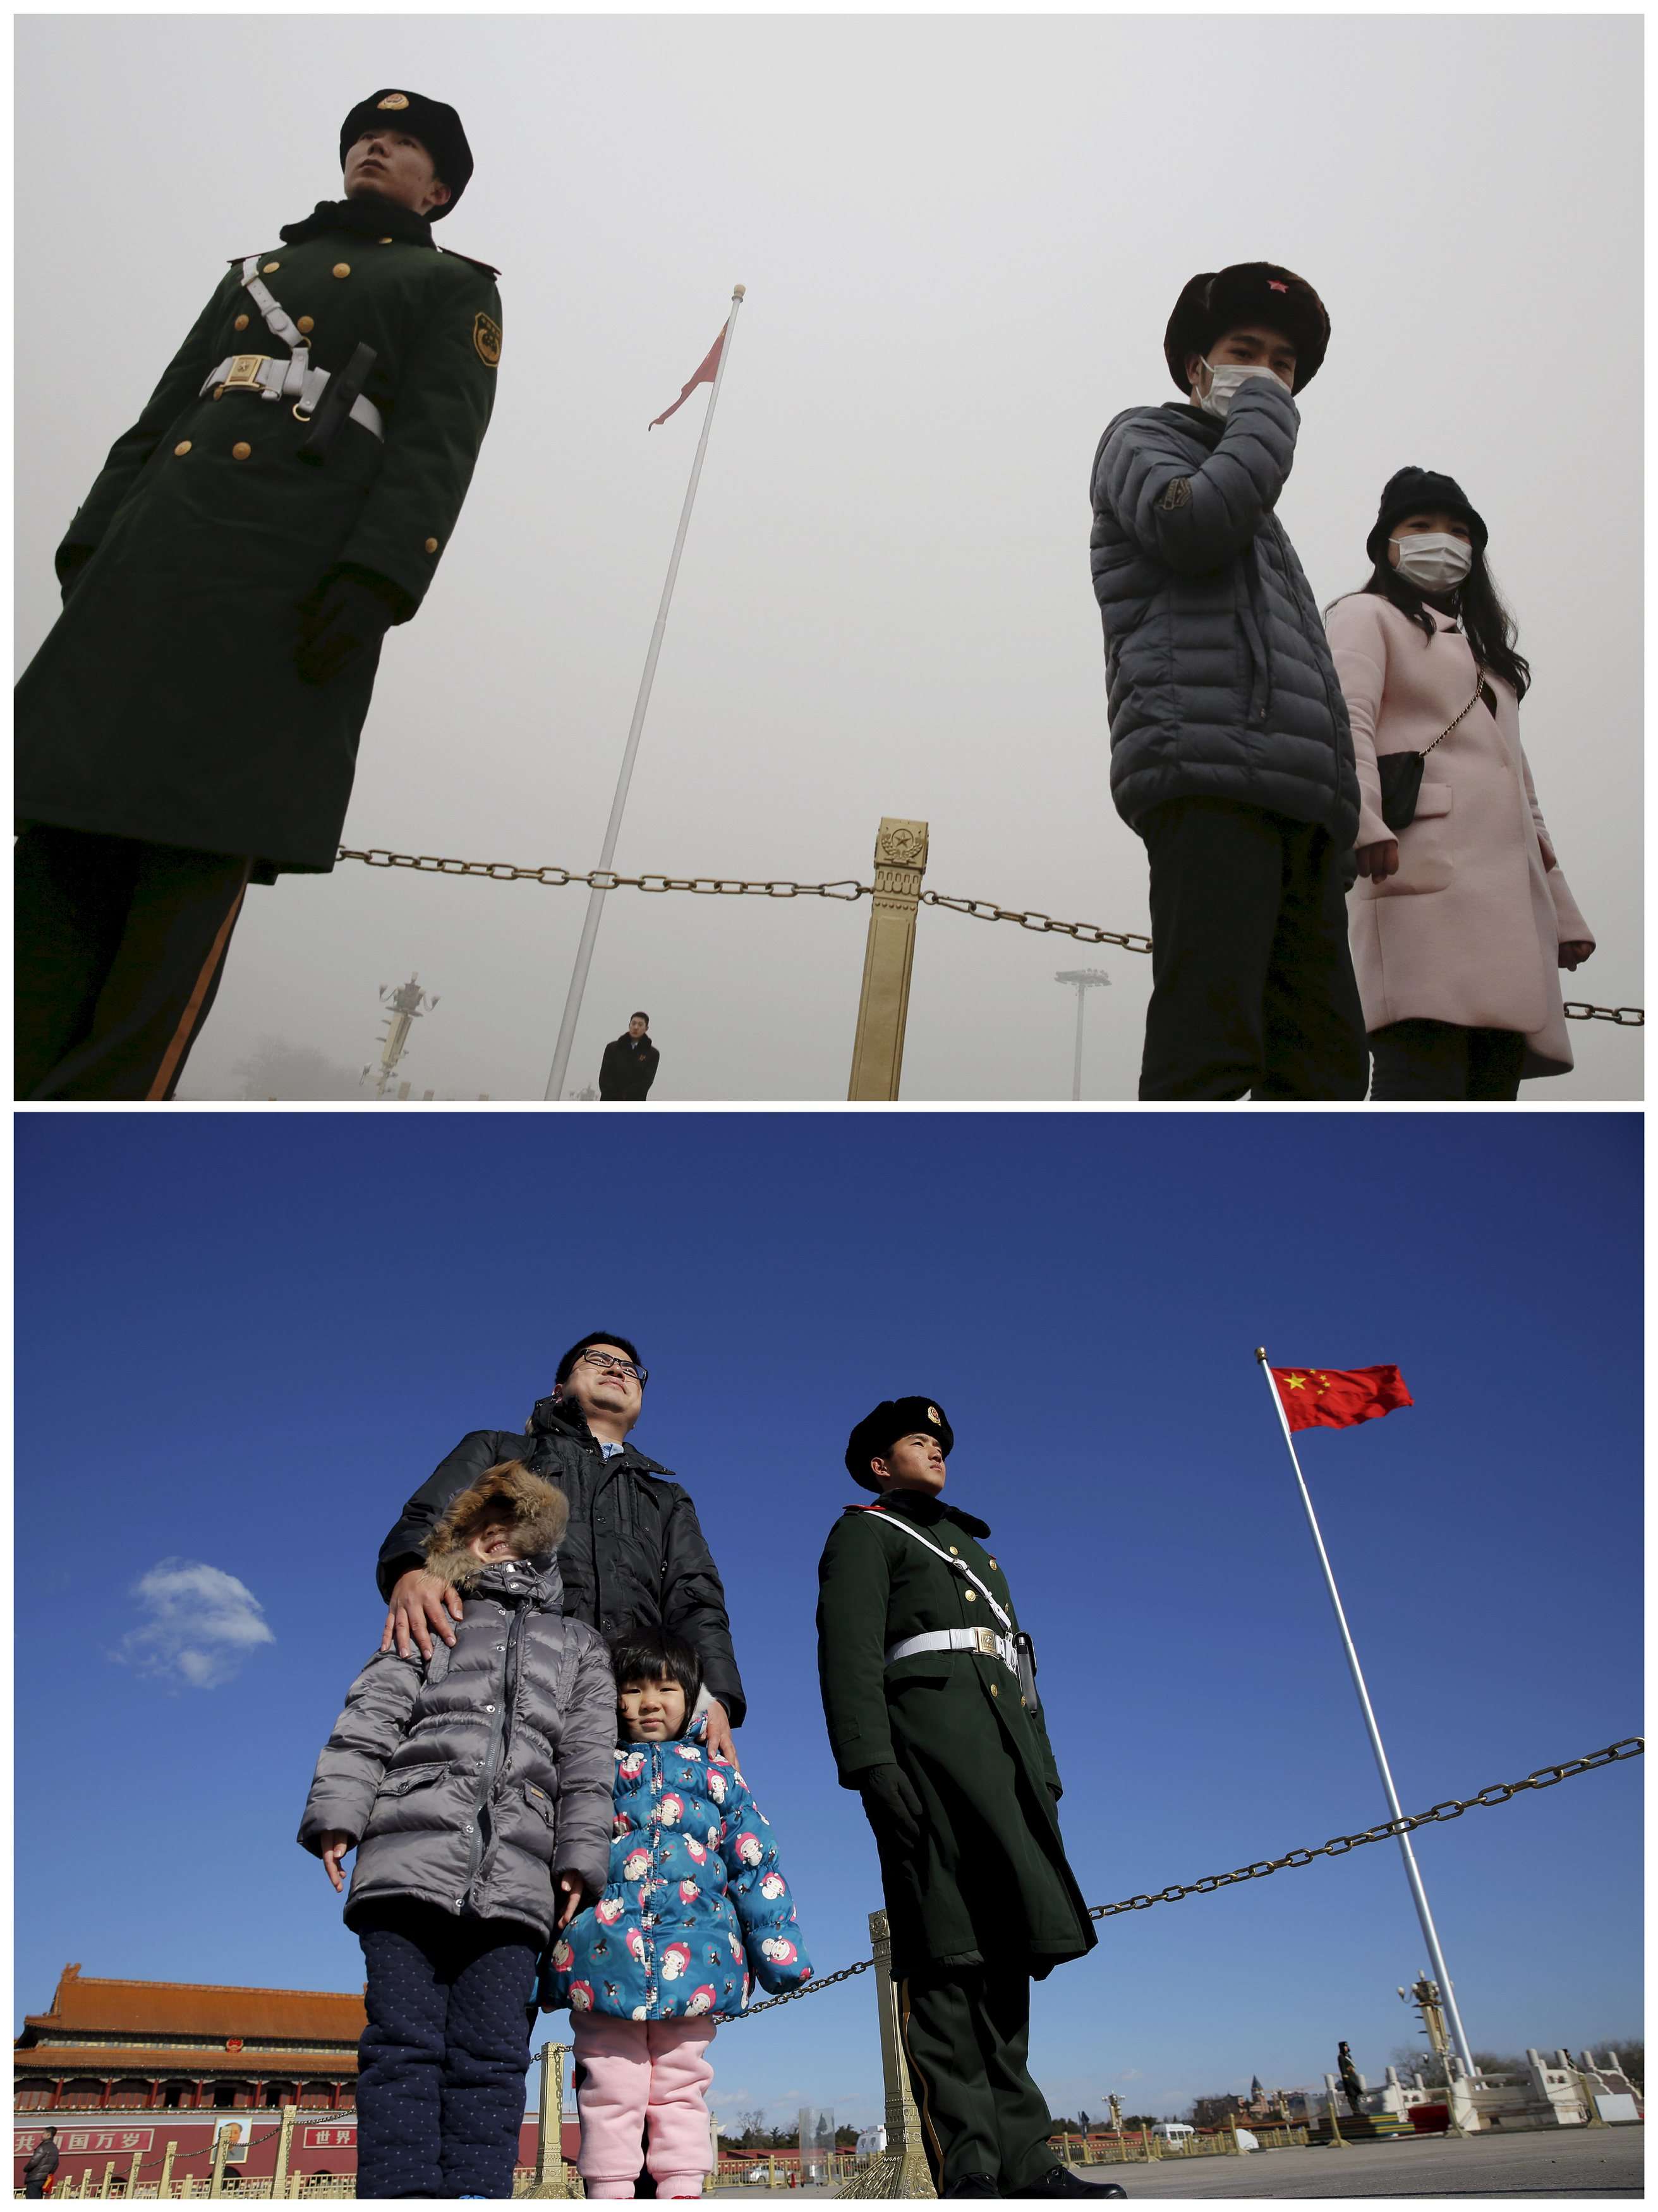 This photo combo shows visitors standing next to a paramilitary policeman as they visit the Tiananmen Square on a smoggy day and a sunny day.